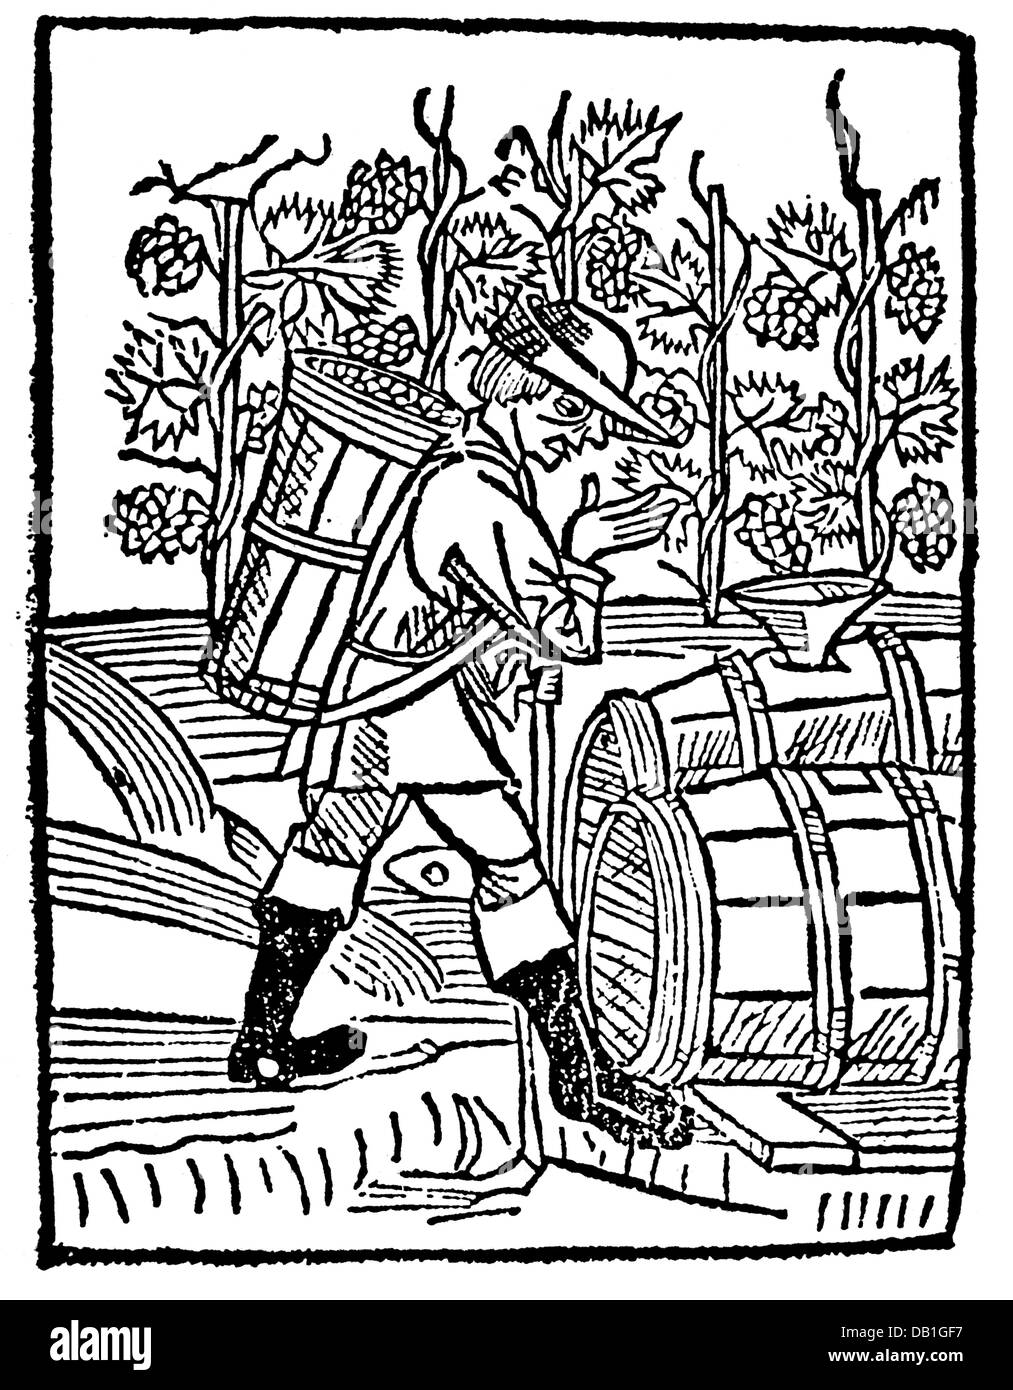 agriculture, viticulture, grape gathering, wine-grower with basket ...